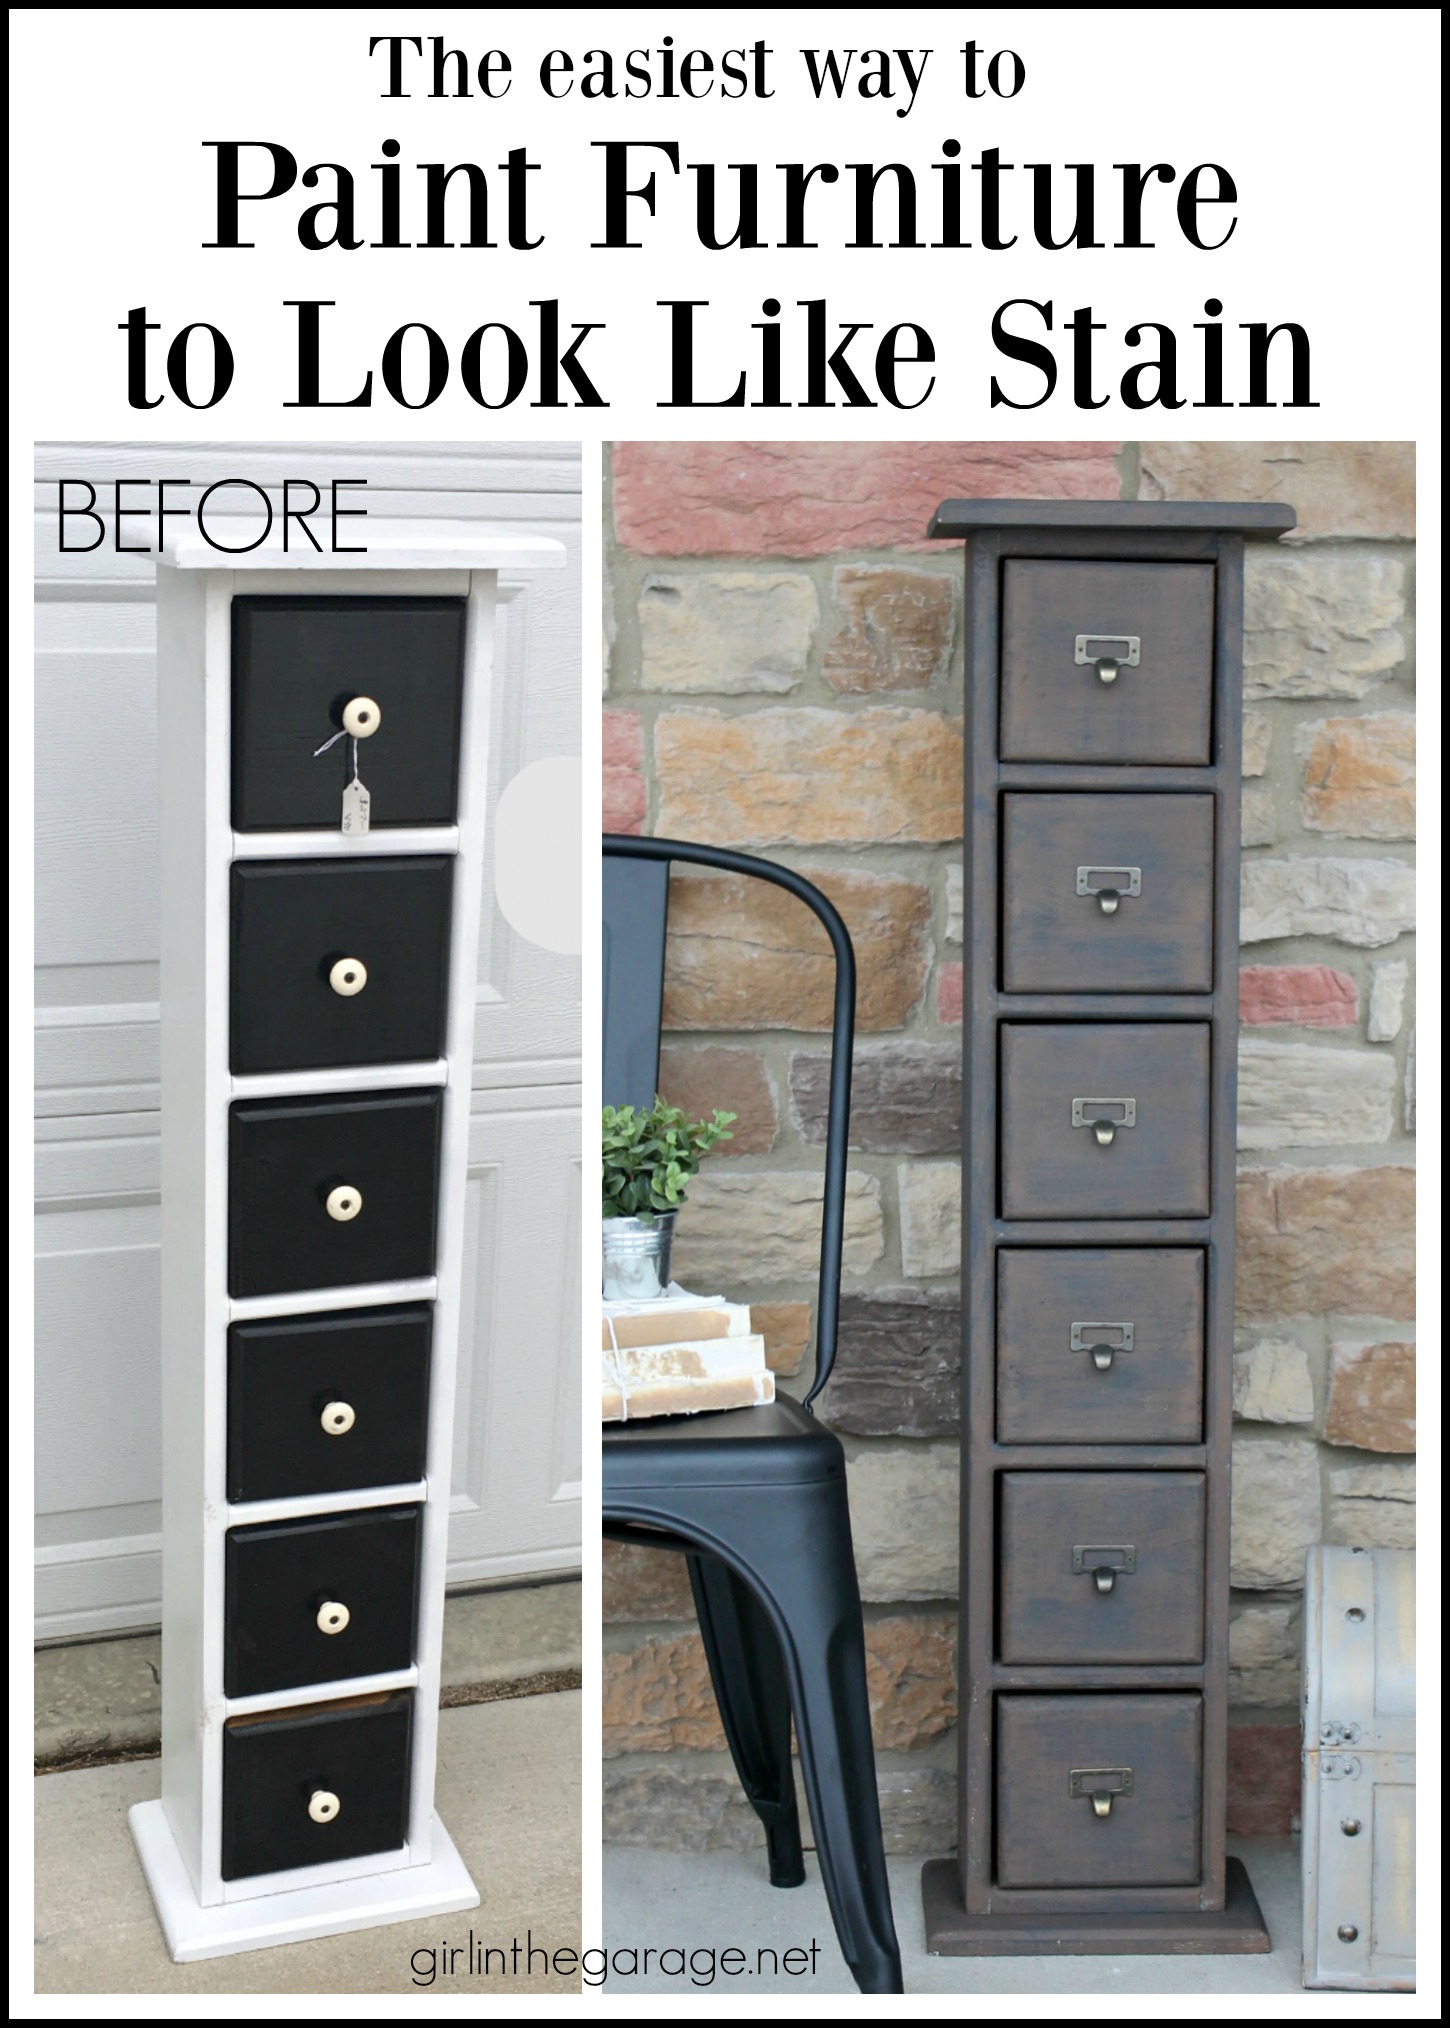 If you want the stained look, but can't have it. Learn how to paint furniture to look like stain. Plus: A card catalog makeover with this faux stain finish! By Girl in the Garage